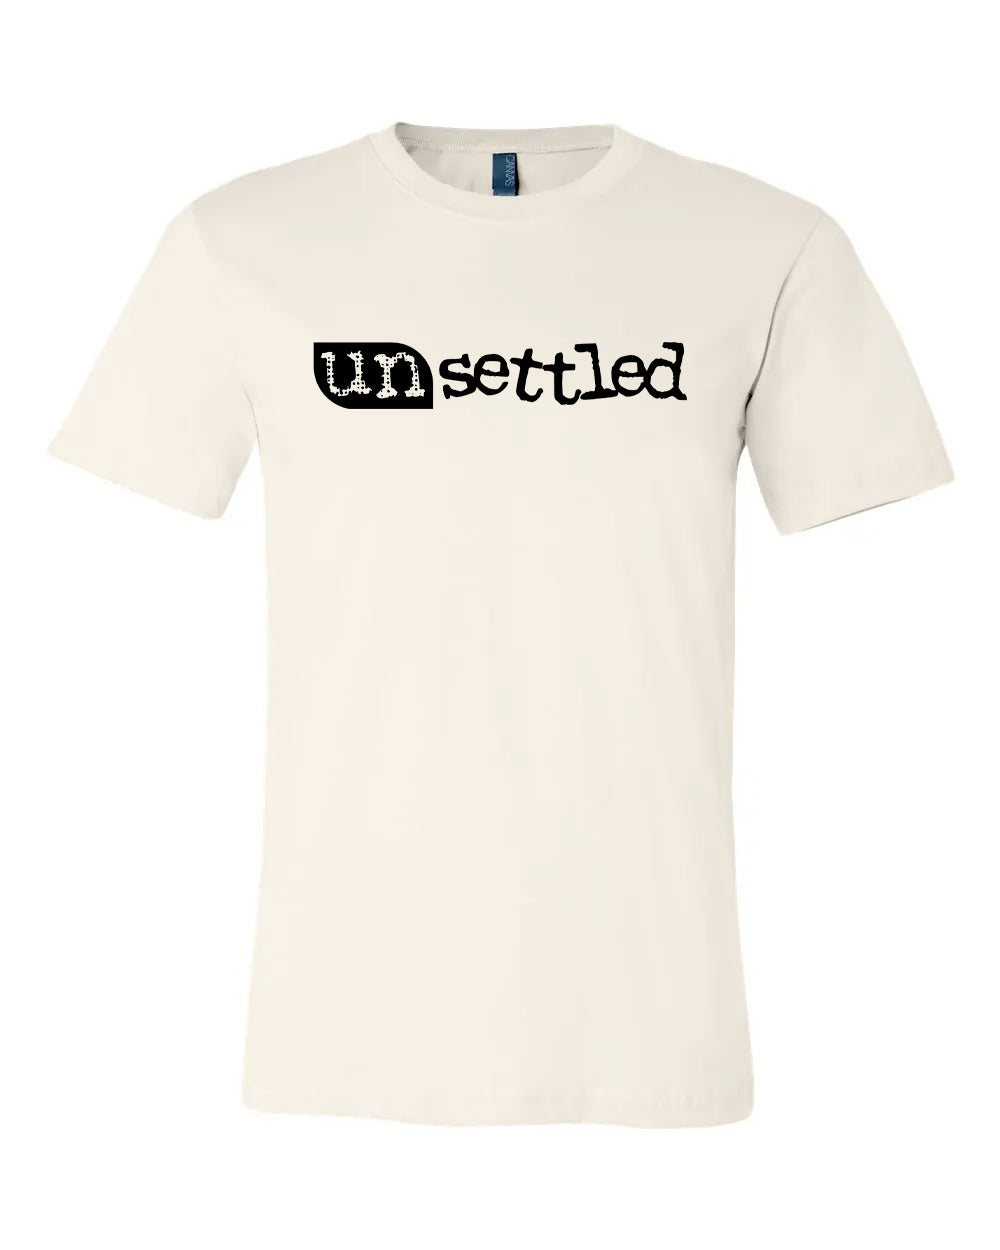 UNSETTLED UNISEX T-Shirts | Unsettled Apparel